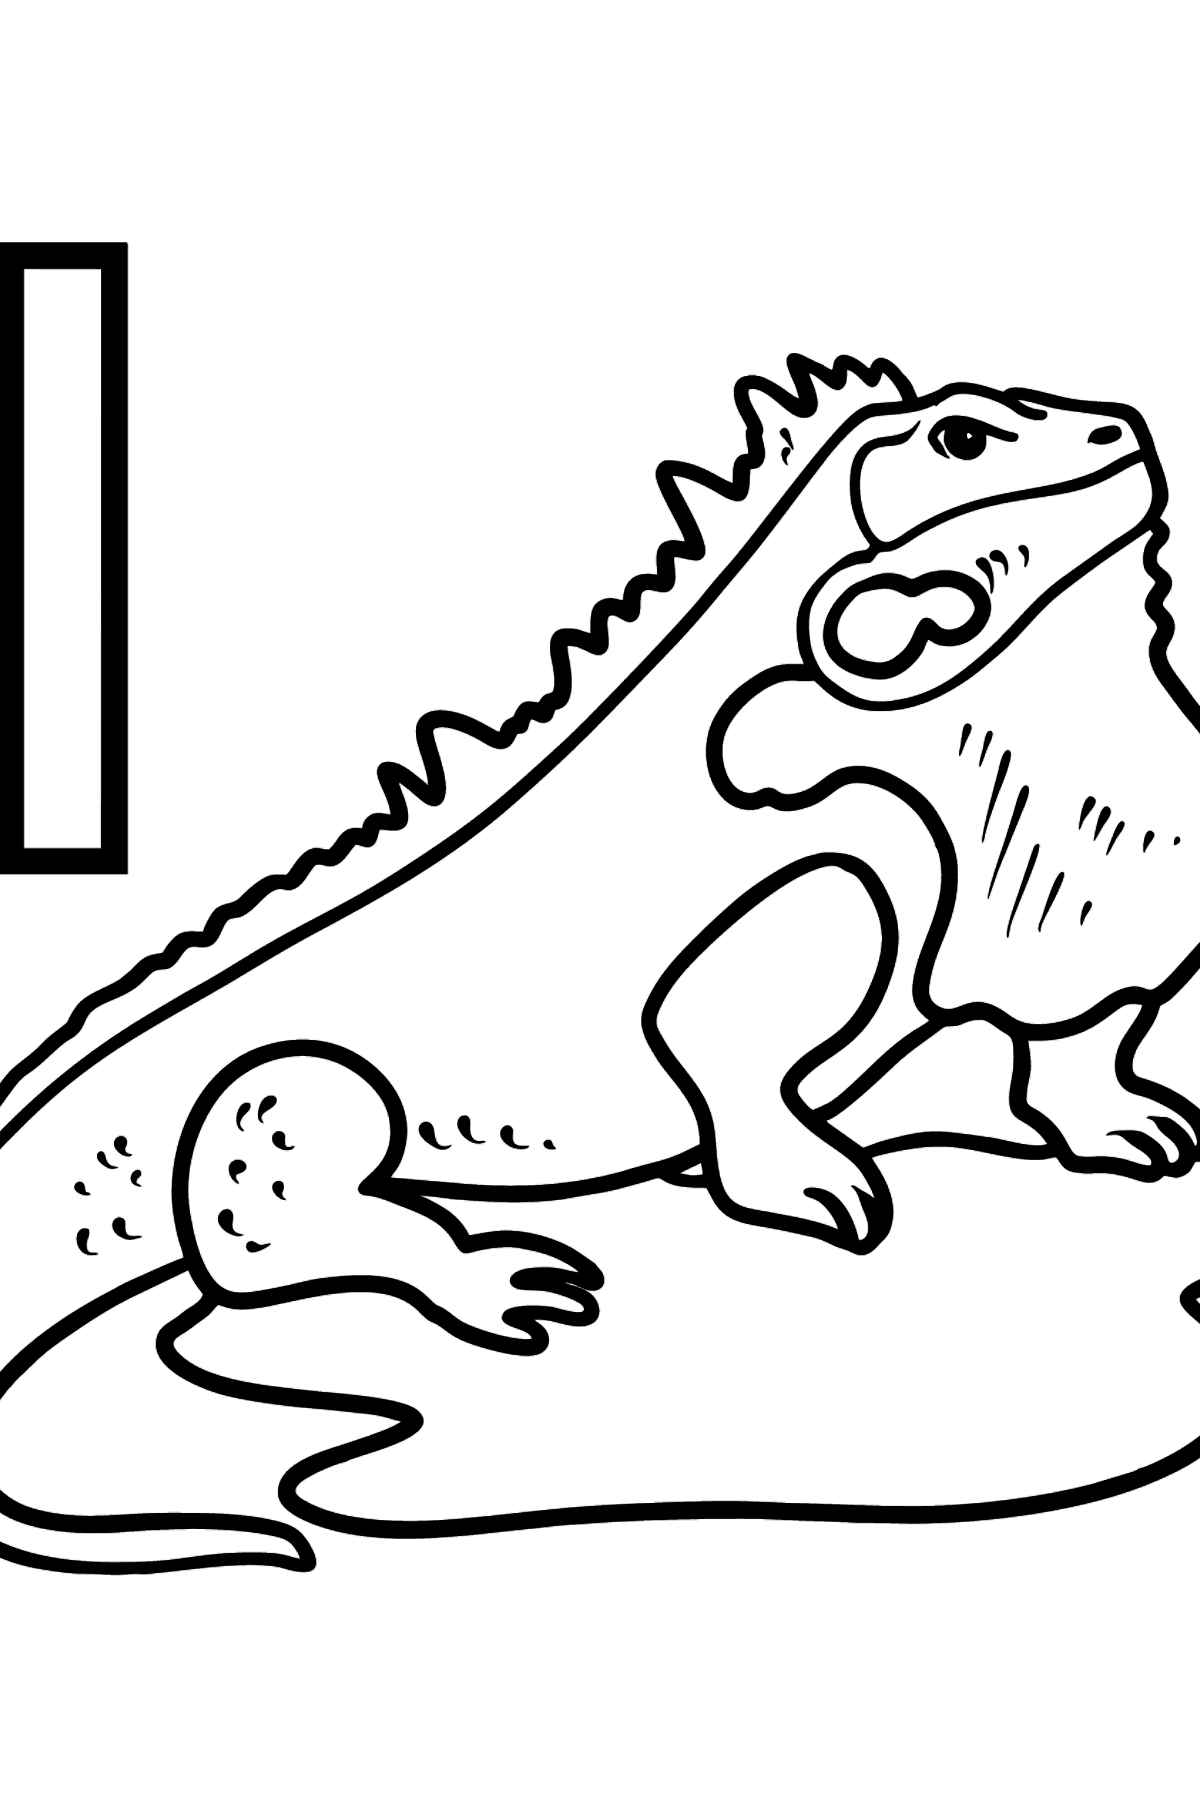 French Letter I coloring pages - IGUANE - Coloring Pages for Kids